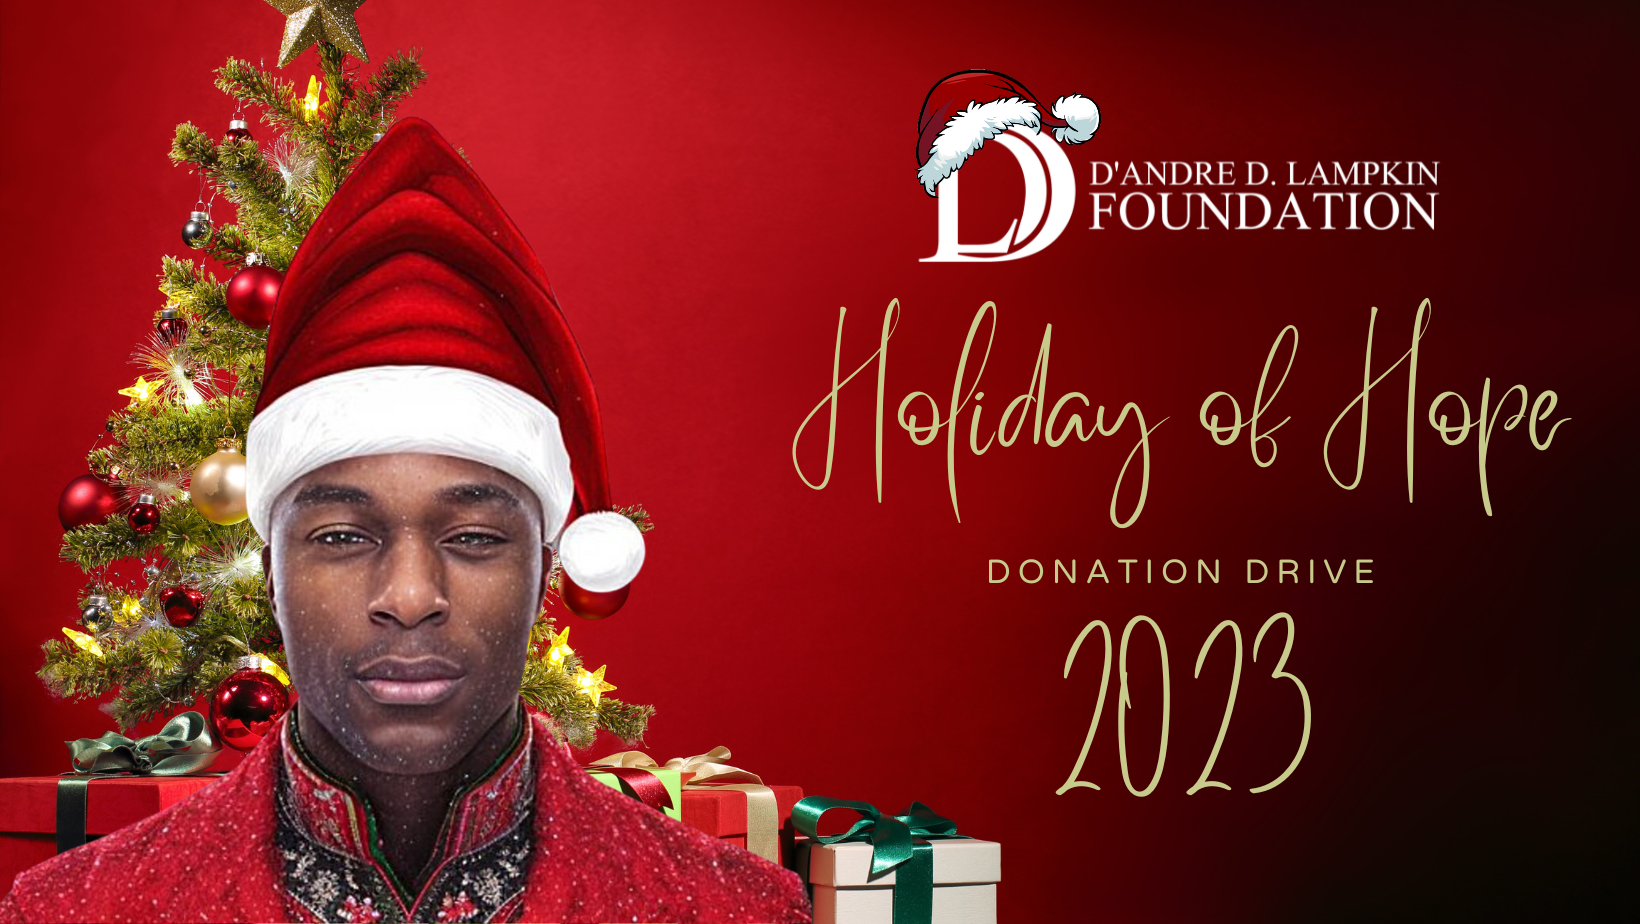 D'Andre D. Lampkin Foundation Holiday of Hope Donation Drive